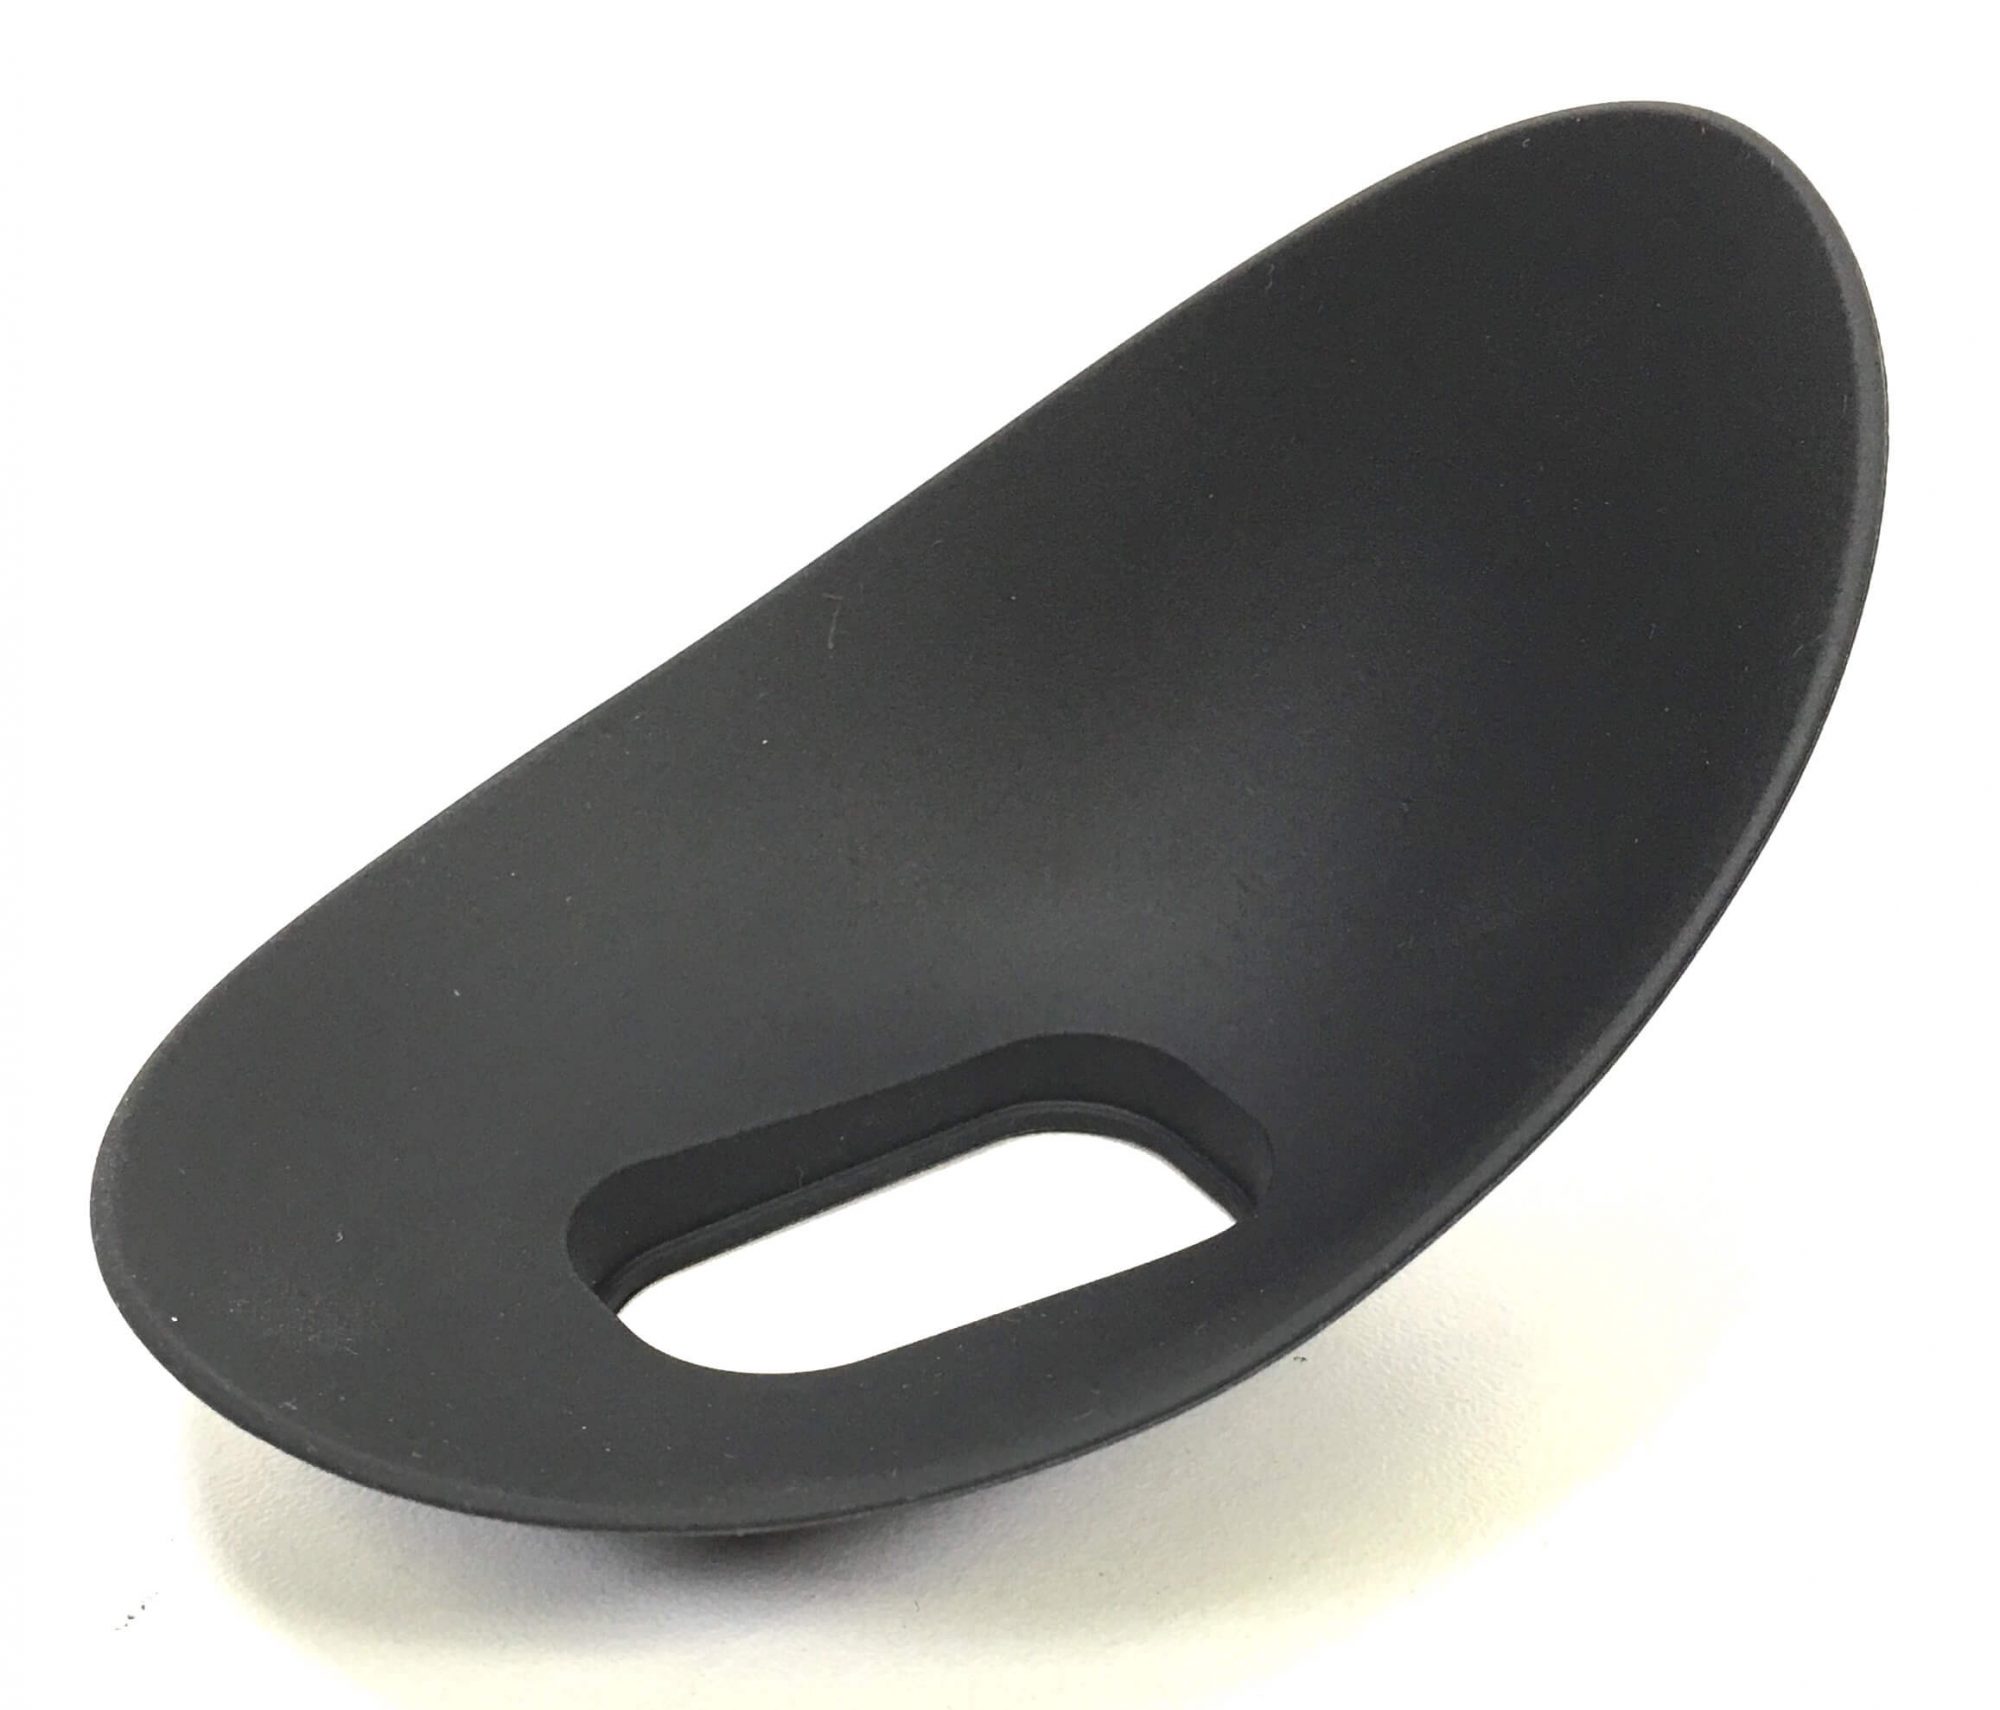 Original large eyecup that fits over the rubber eyepiece on the camcorder of the Sony FDR-AX100 camcorder. It is a genuine Sony part, sourced directly from Sony USA. Brand new factory fresh. Free Shipping.